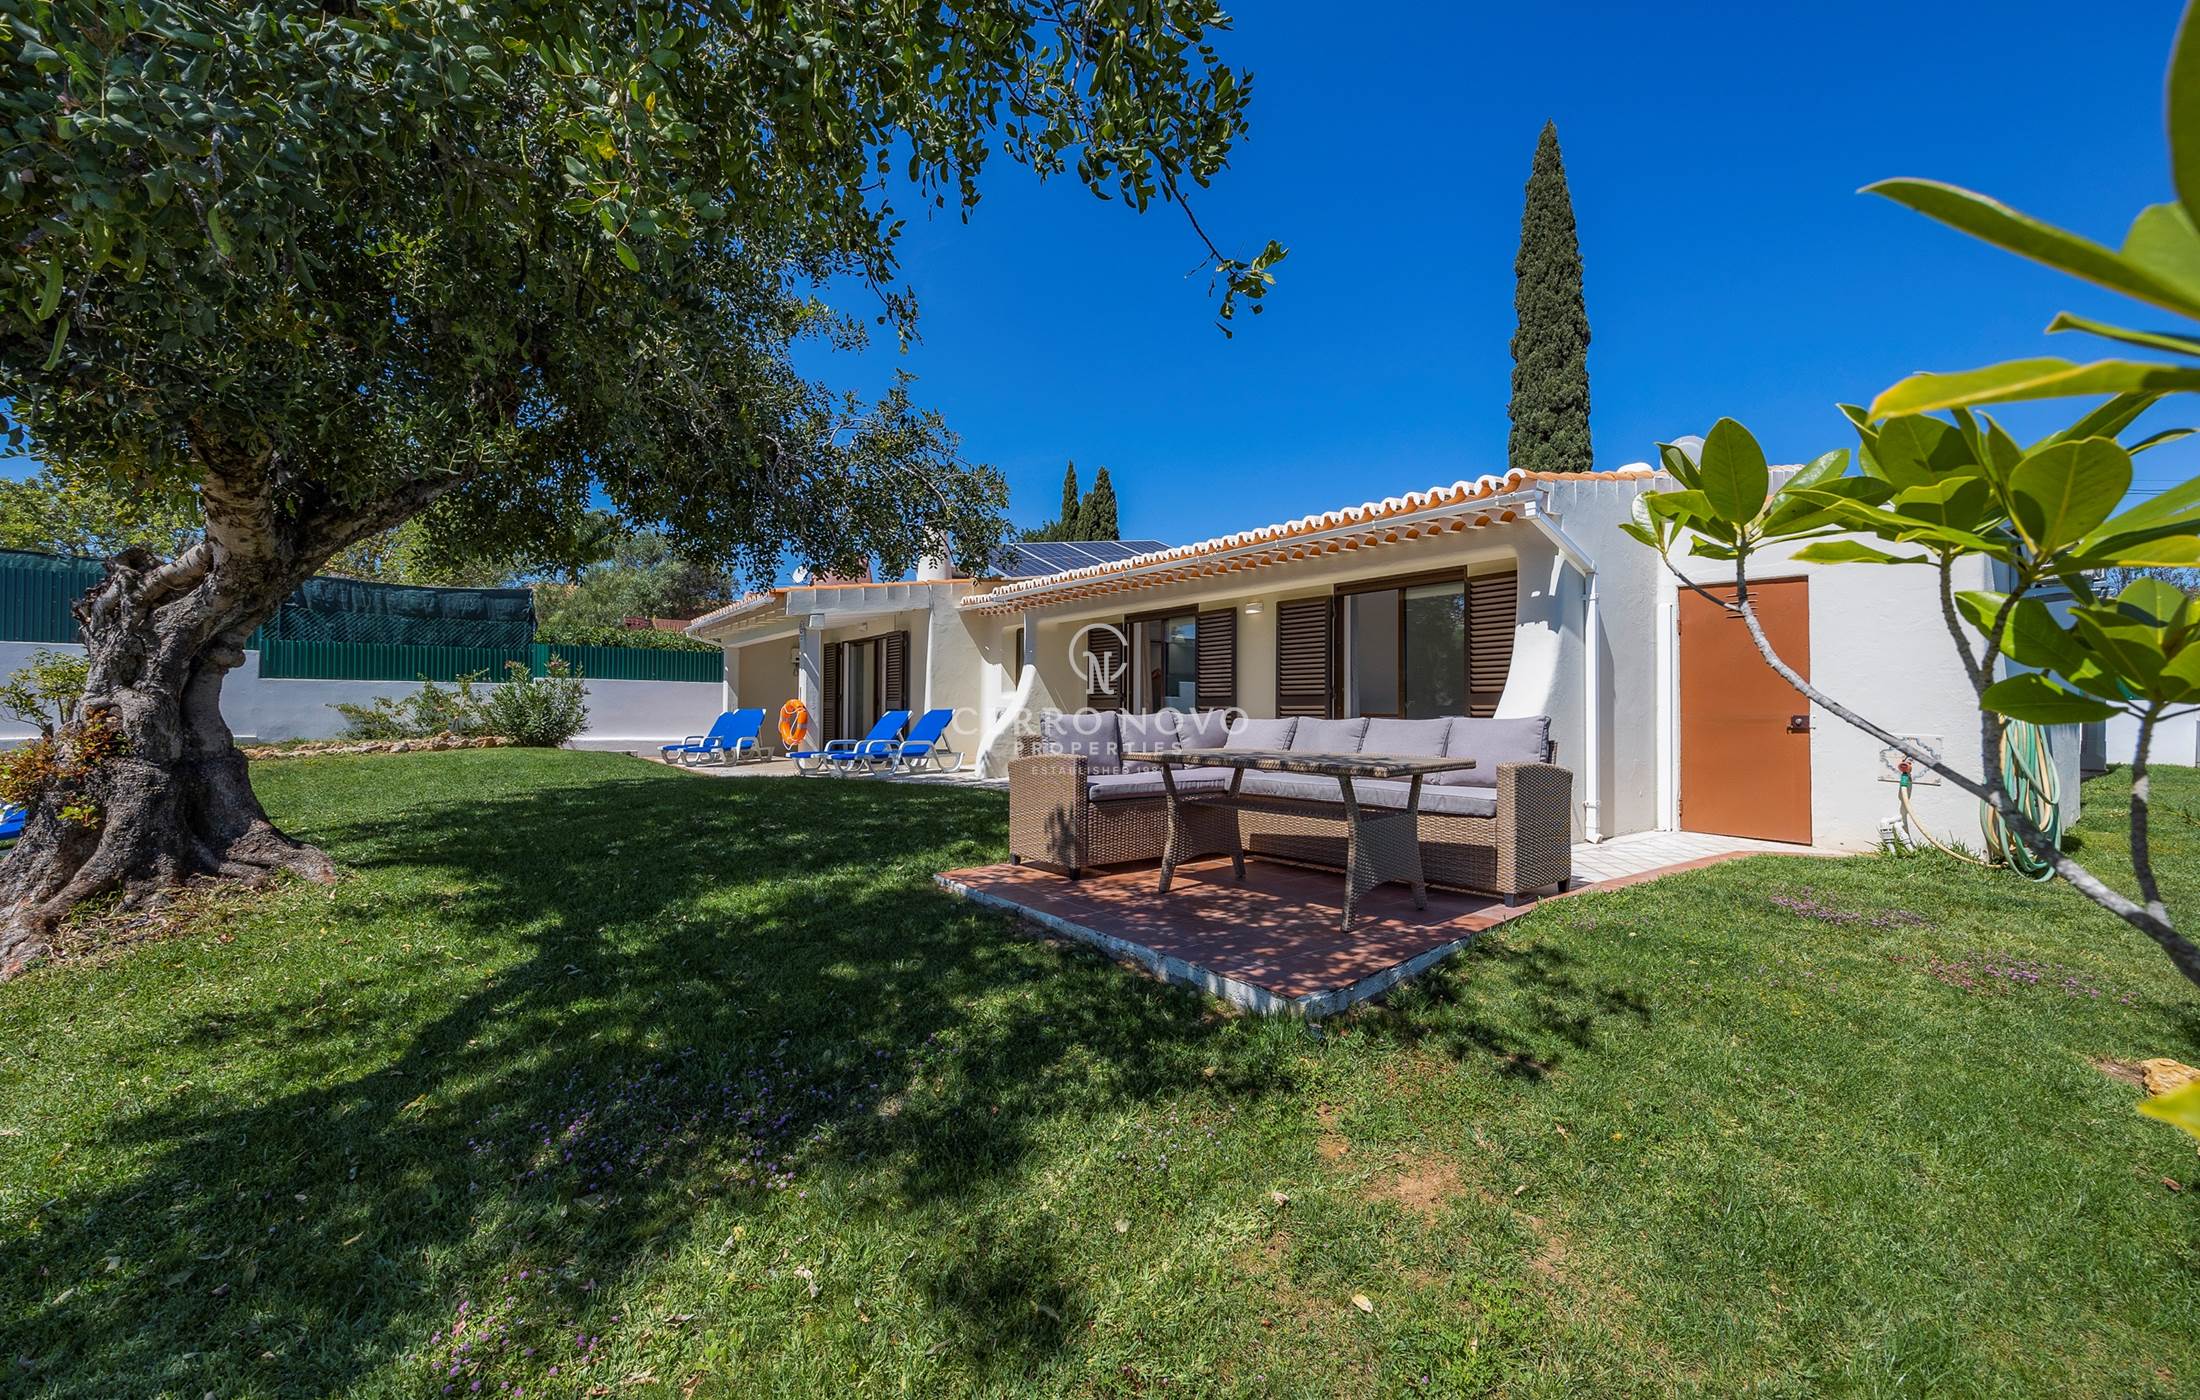 Fully modernised detached villa in a great central location